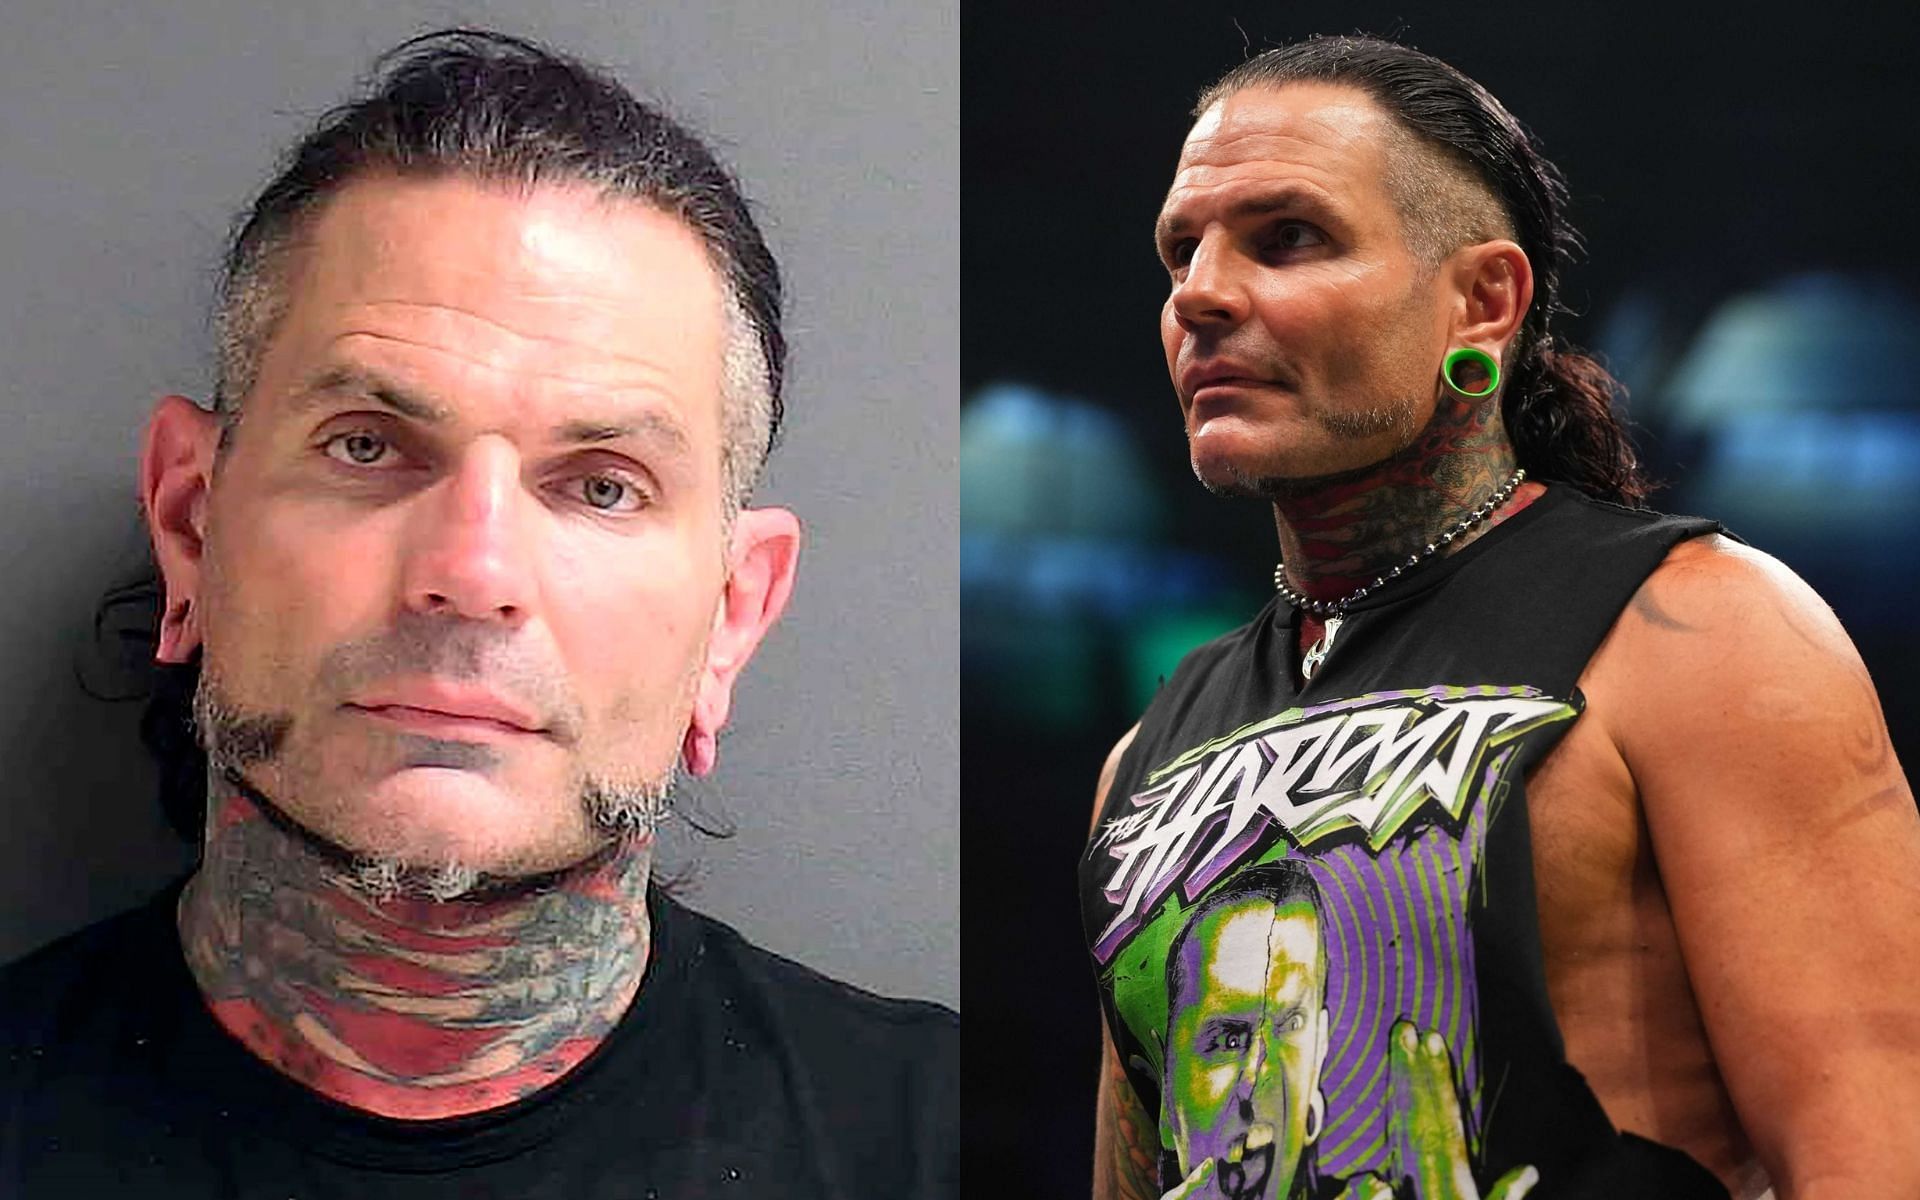 Jeff Hardy is currently suspended by AEW following his DUI arrest in June.